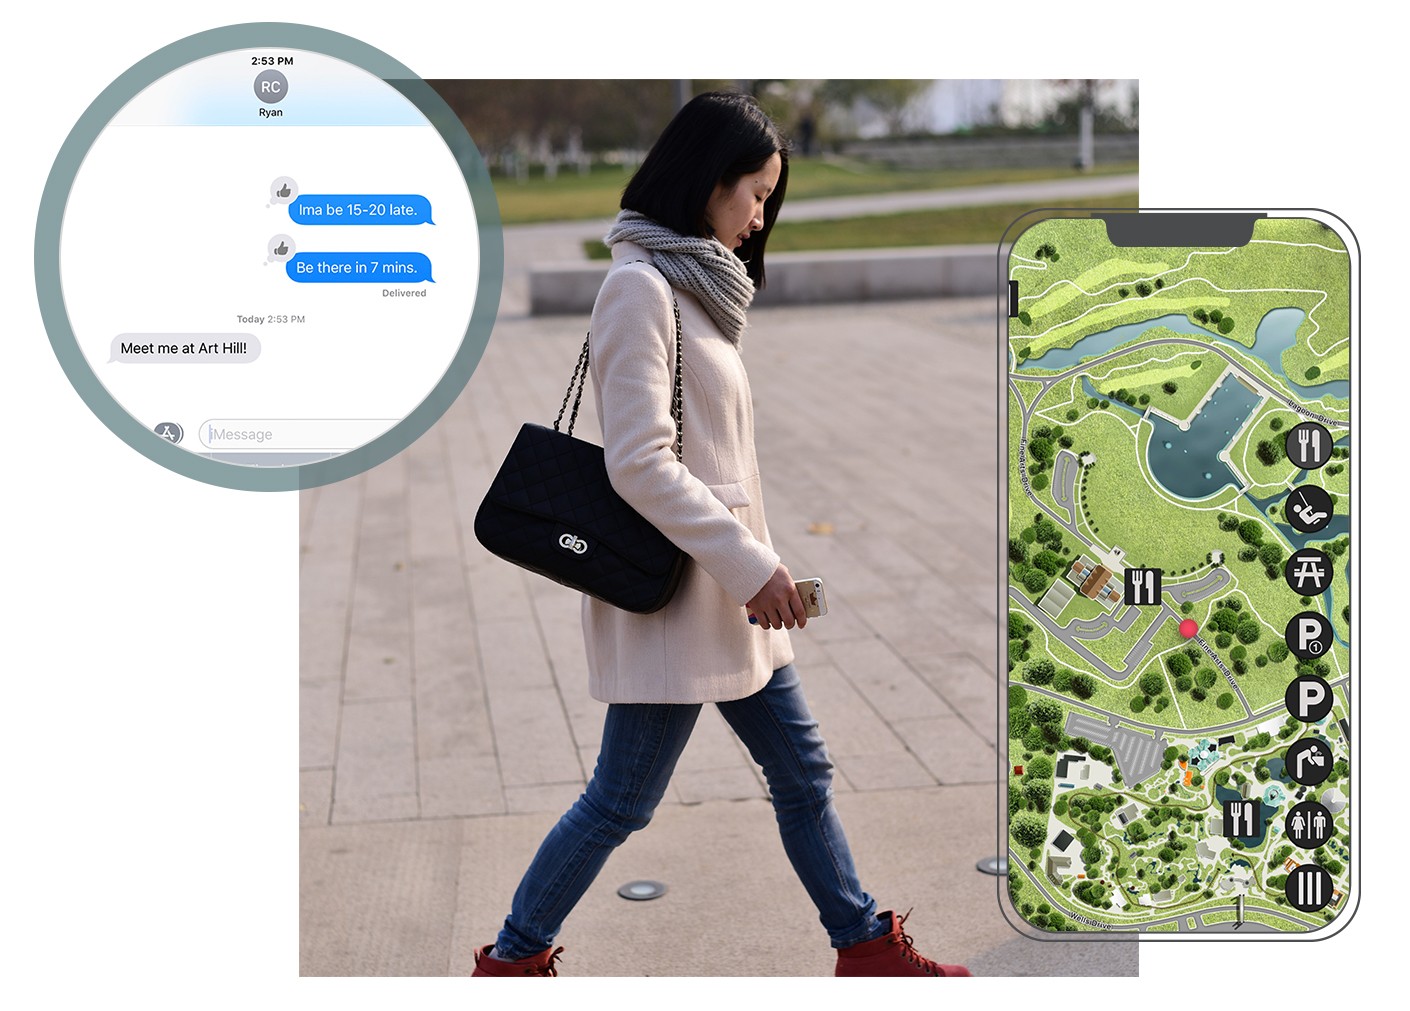 User journeys through the park were carefully considered during the mobile app development process.